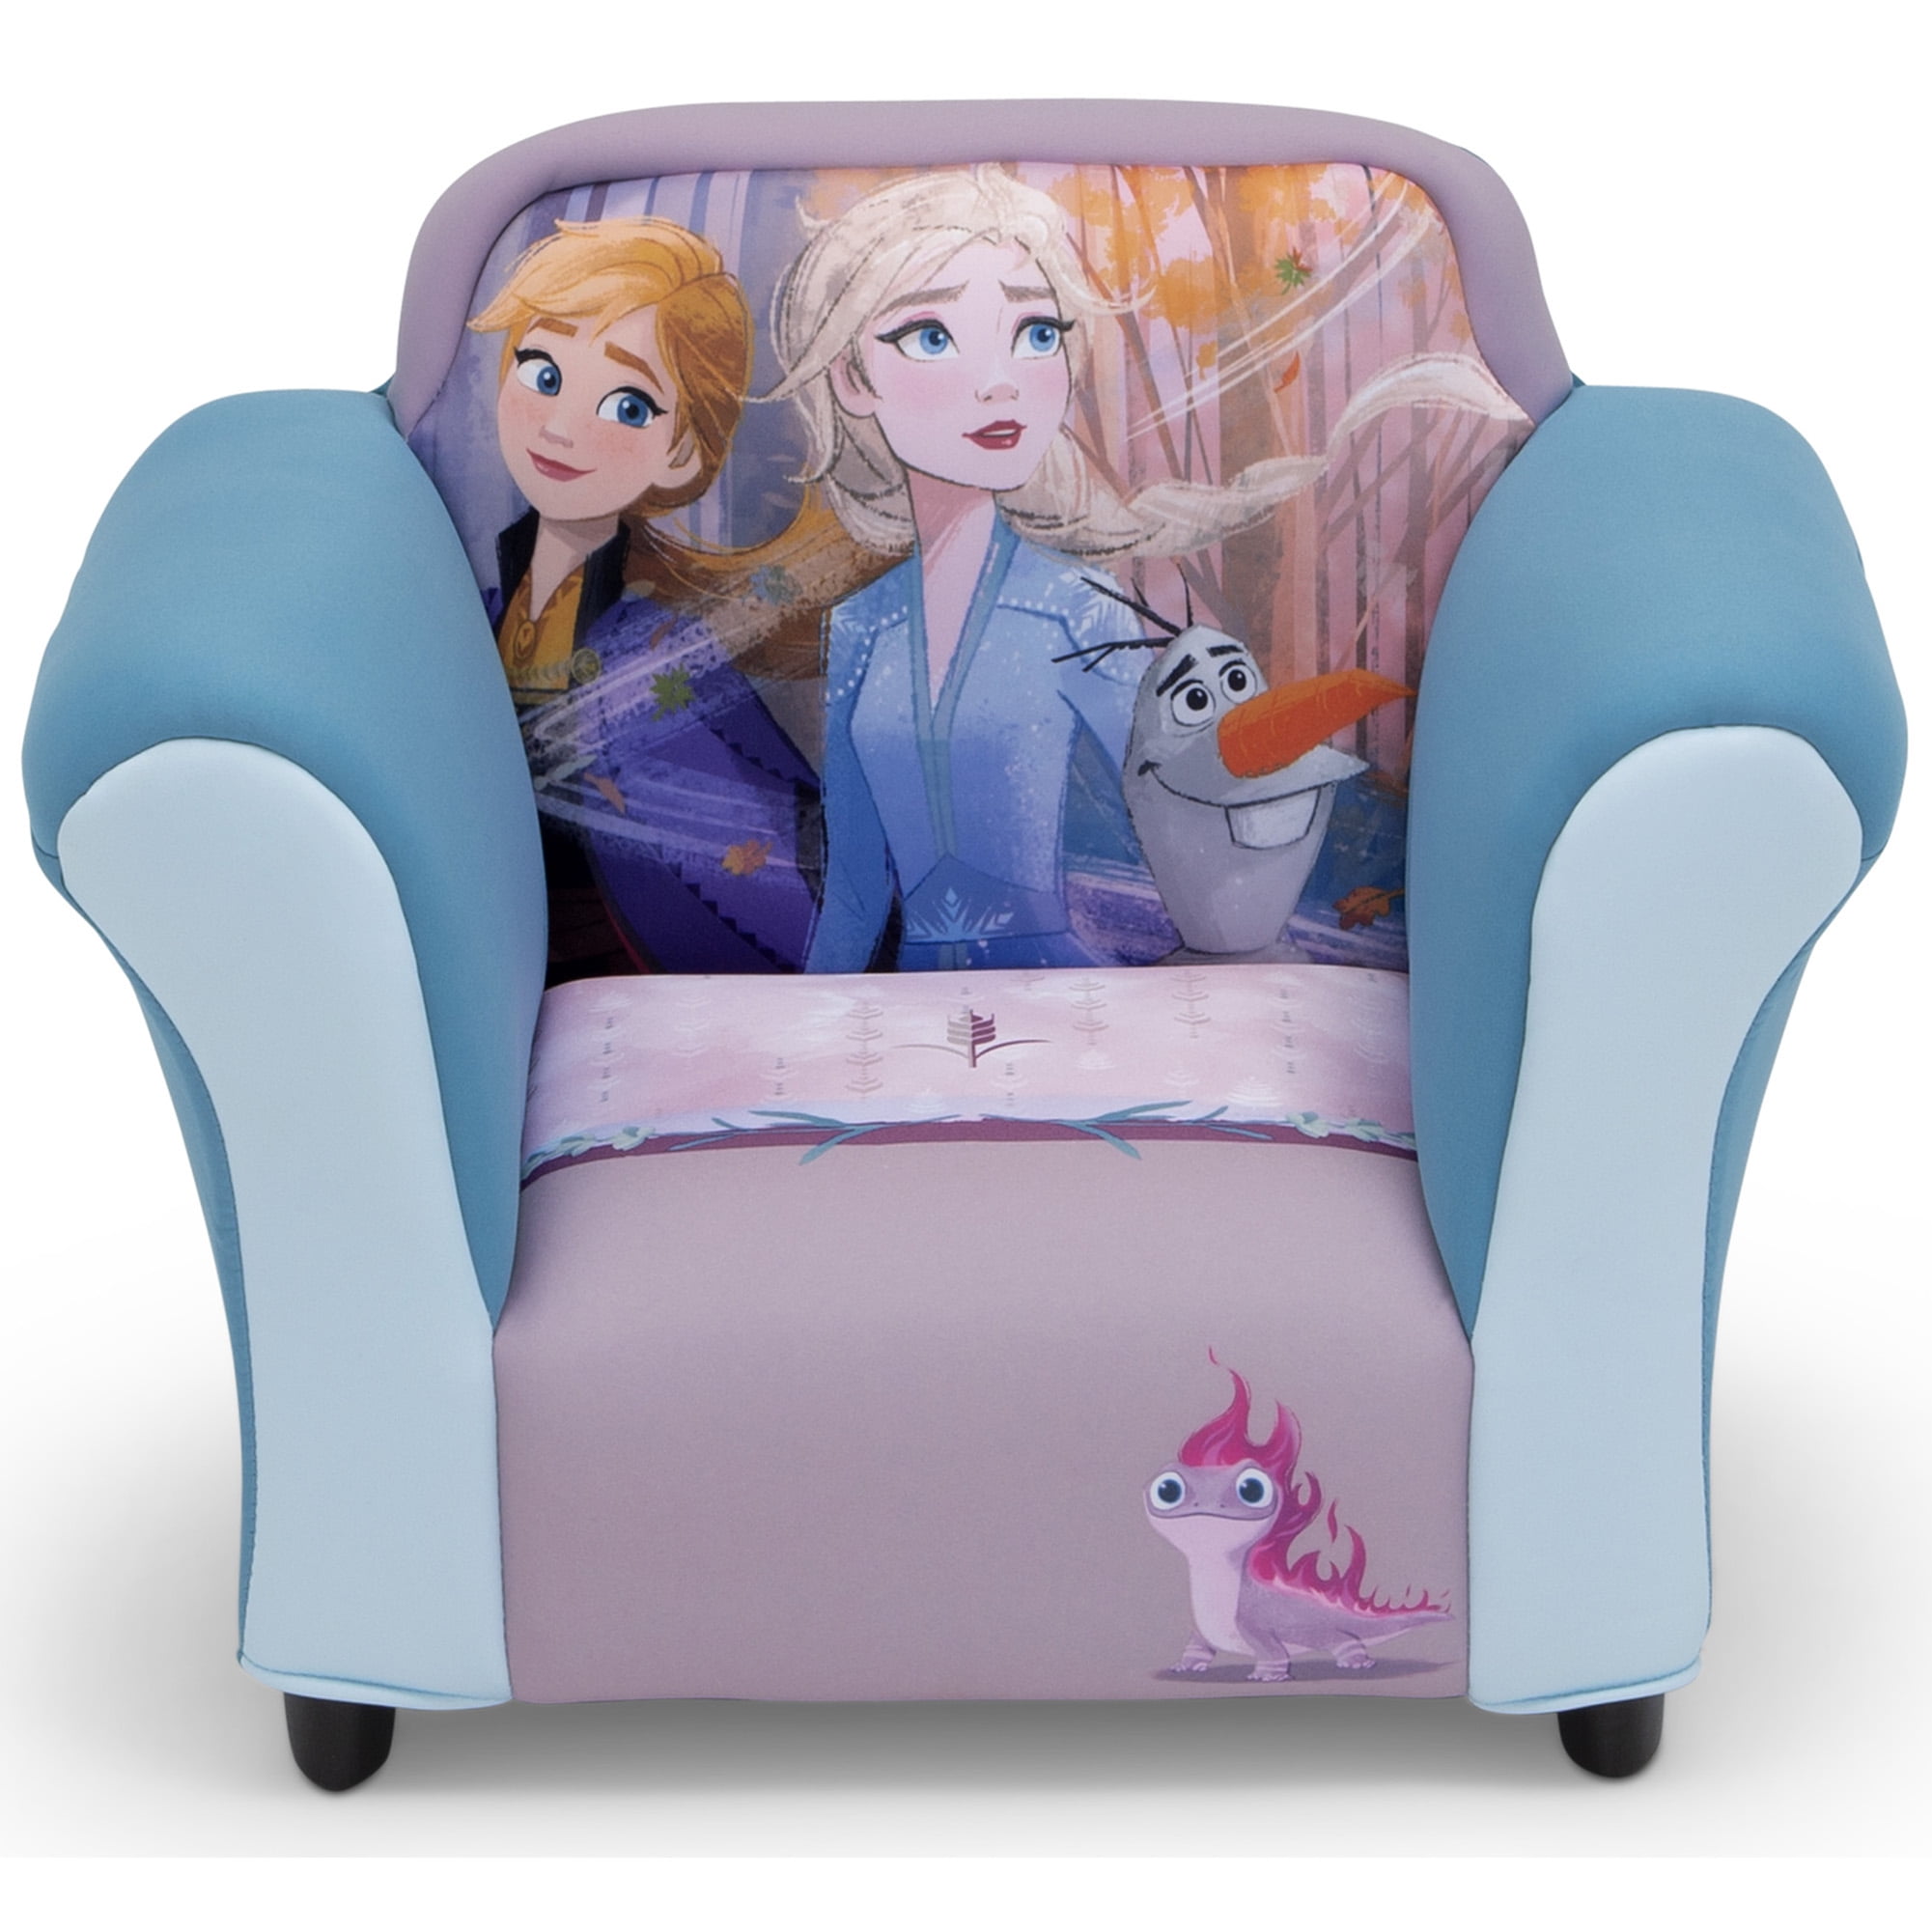 Details about   Marshmallow Furniture Flip-See-Do Foam Toddler Chair Disney's Frozen 2 Used 